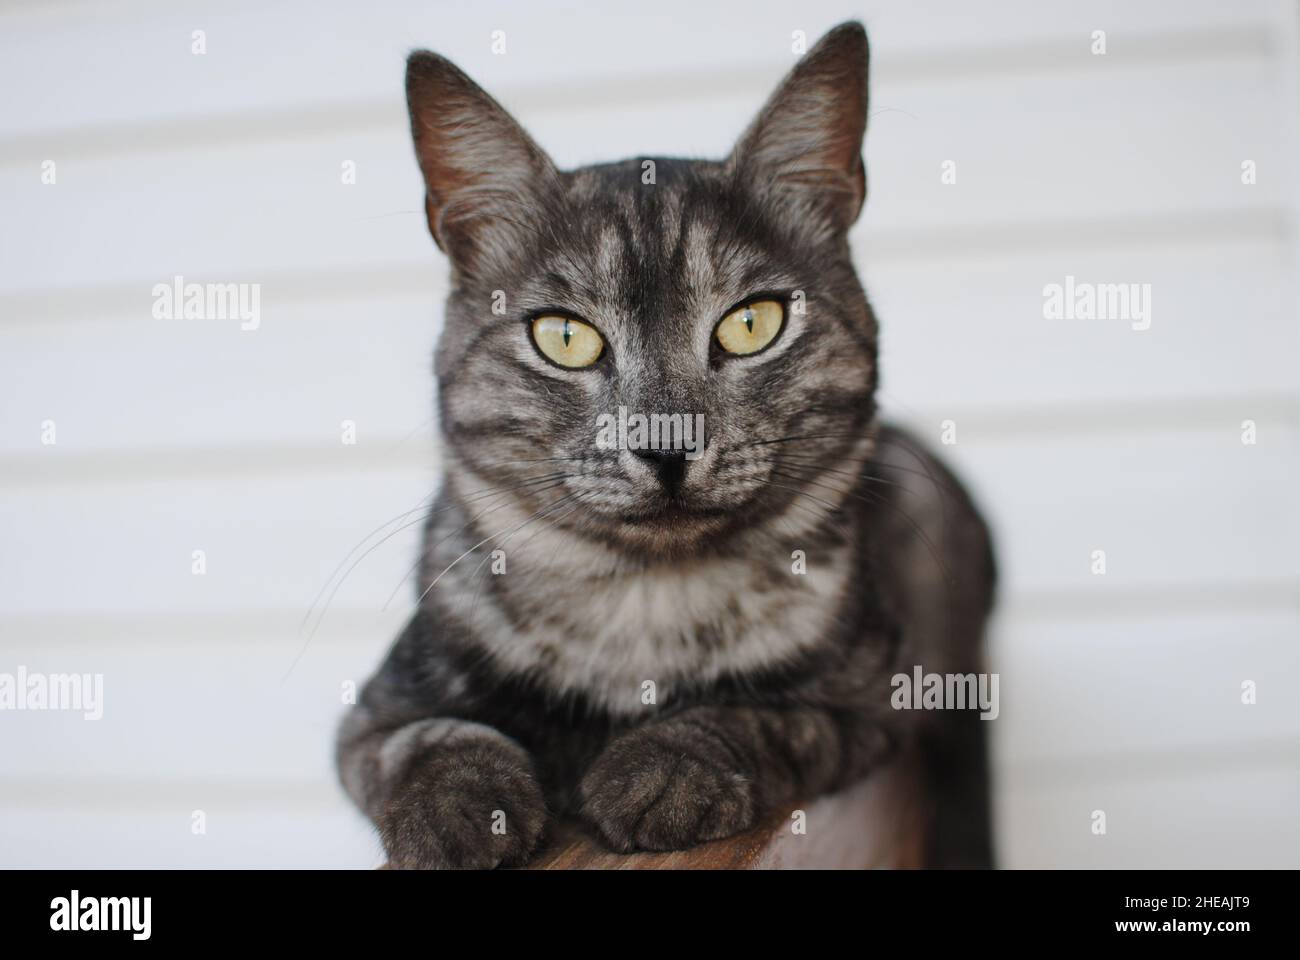 Striped cat, a cross between a breed of tabby mackerel, lies on a wooden bench against a background of white siding Stock Photo